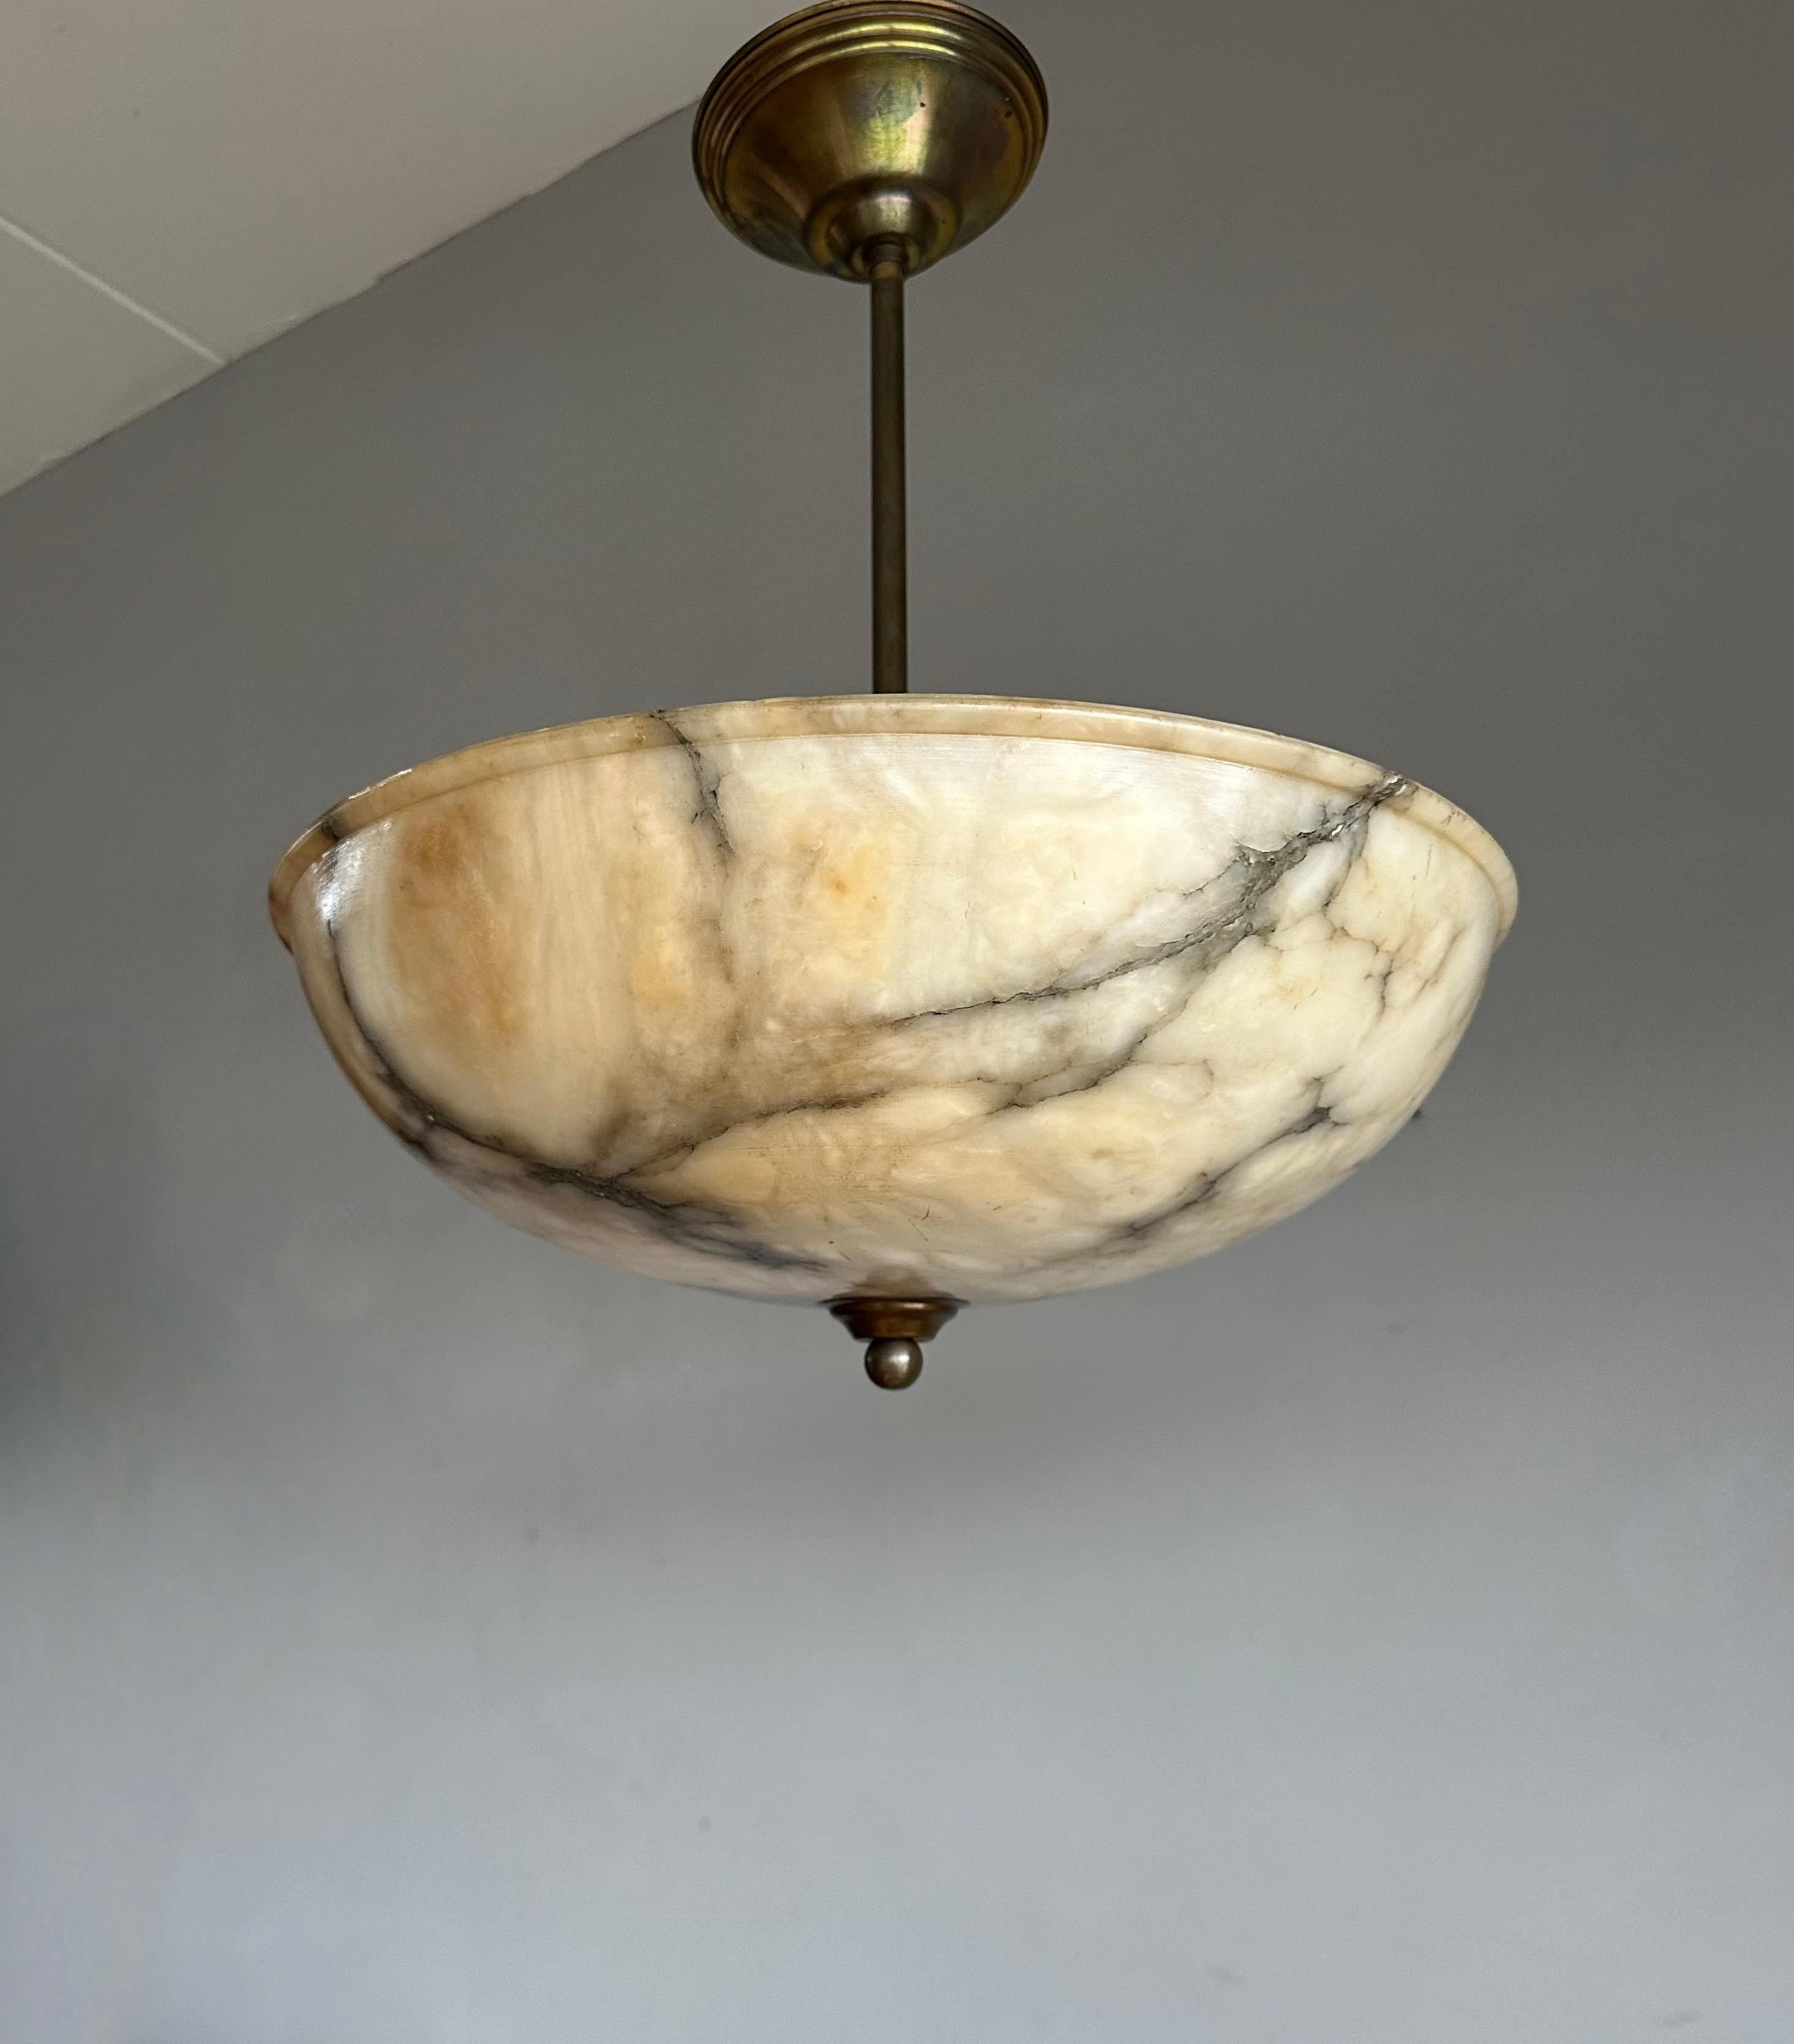 Timeless masterpiece and superb condition alabaster light fixture / flush mount.

Imagine a sultry evening in the 1920s as the warm glow of an exquisite alabaster pendant light fills the room. The brass details shimmer in the light, and the